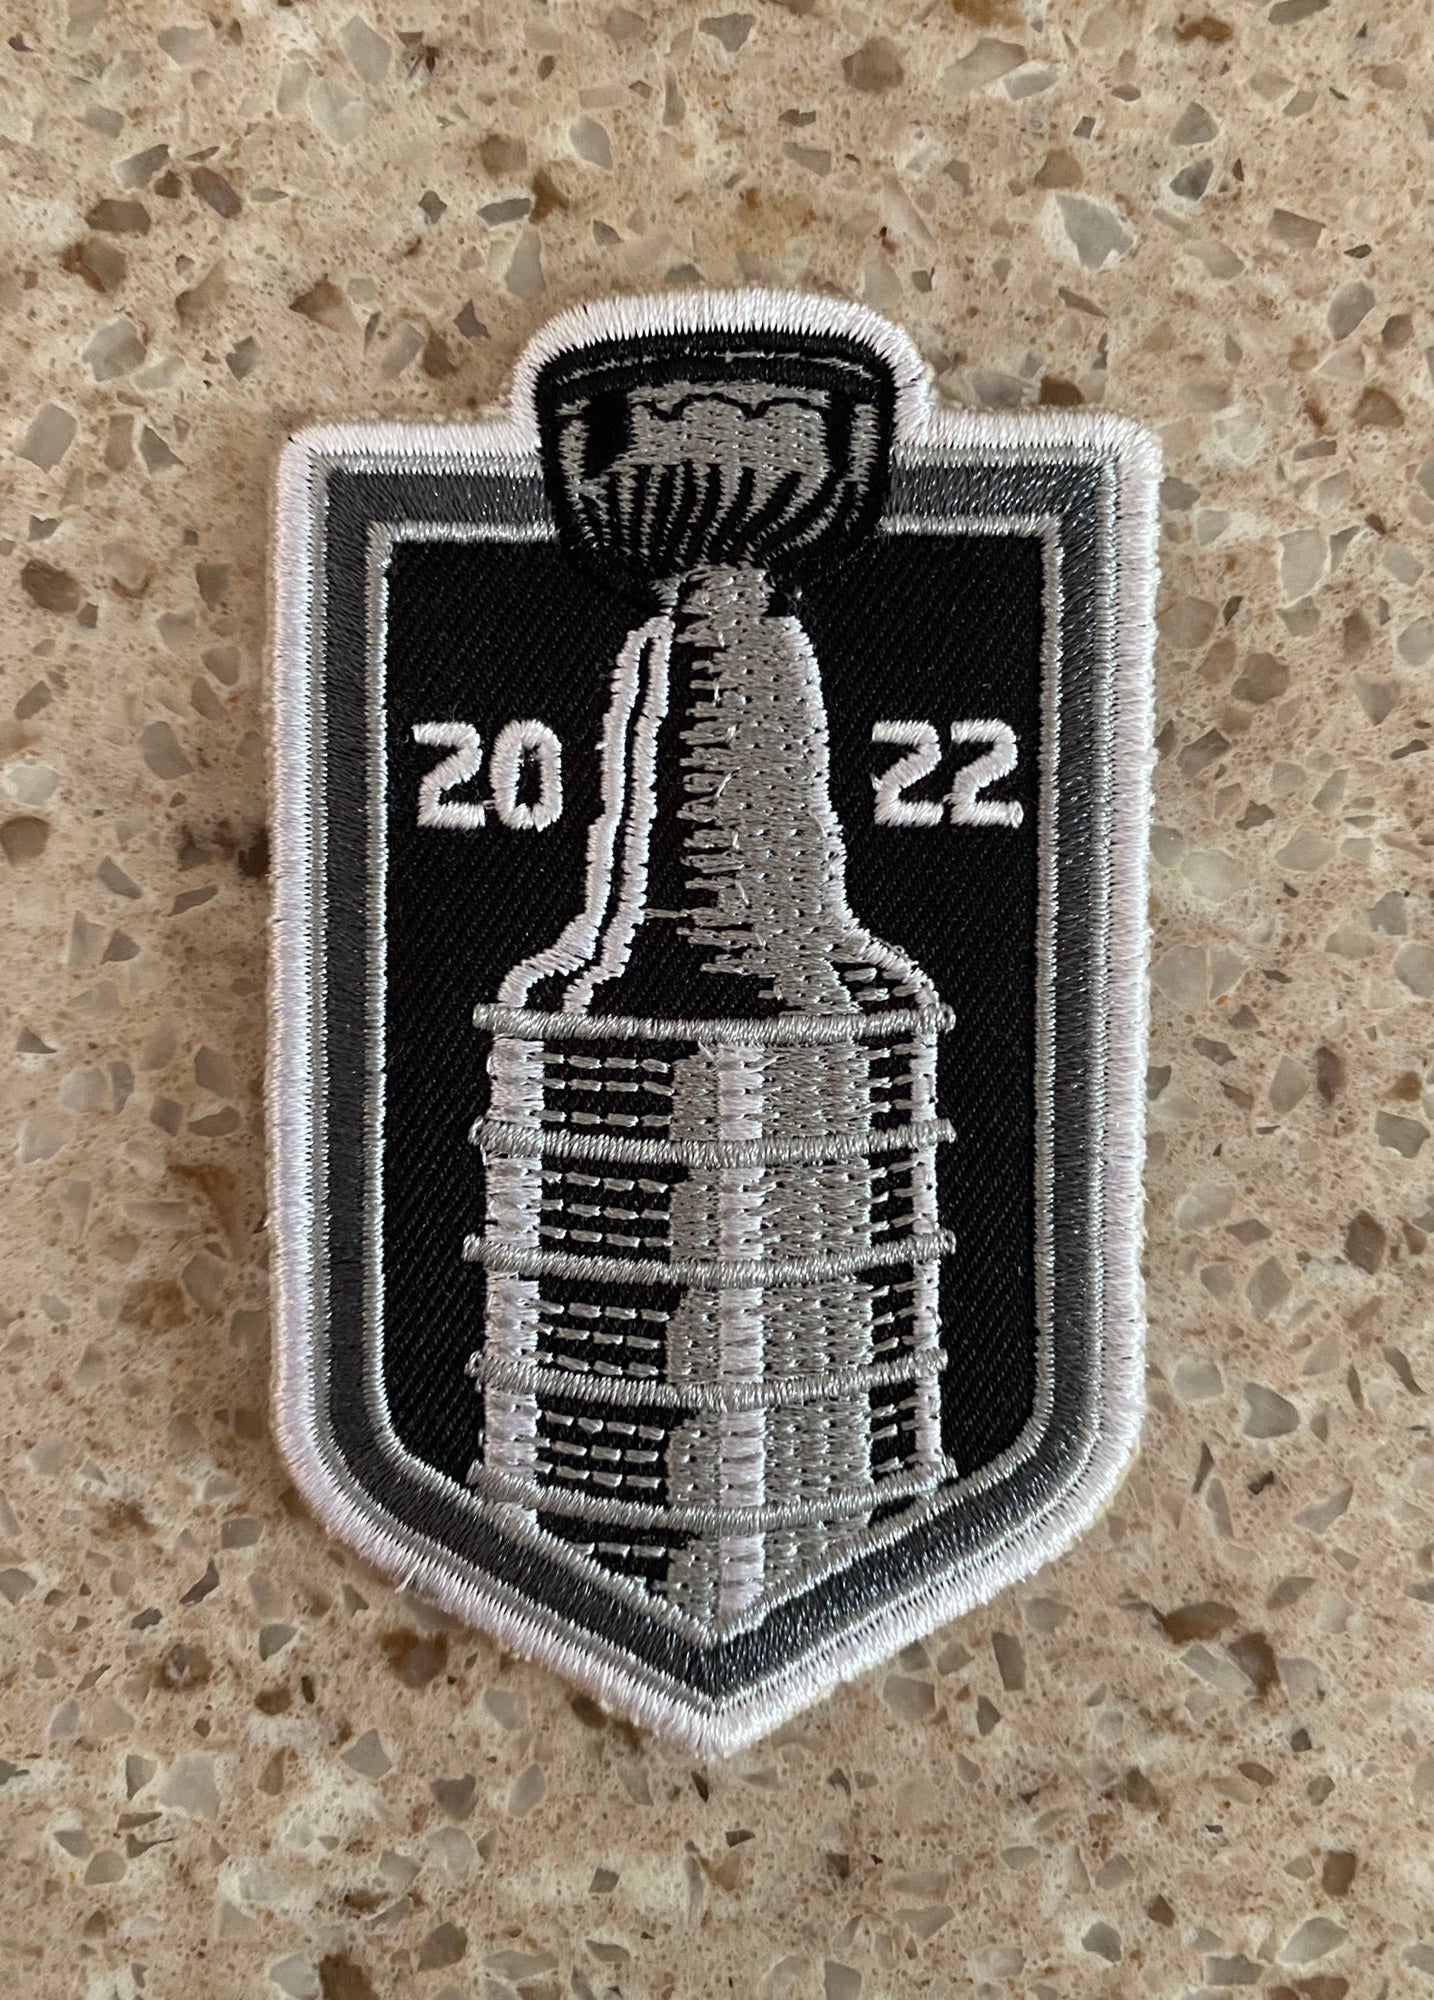 Official 2022 Stanley Cup Finals Patch + Colorado Avalanche Champions Patch  - Hockey Jersey Patch - Iron On